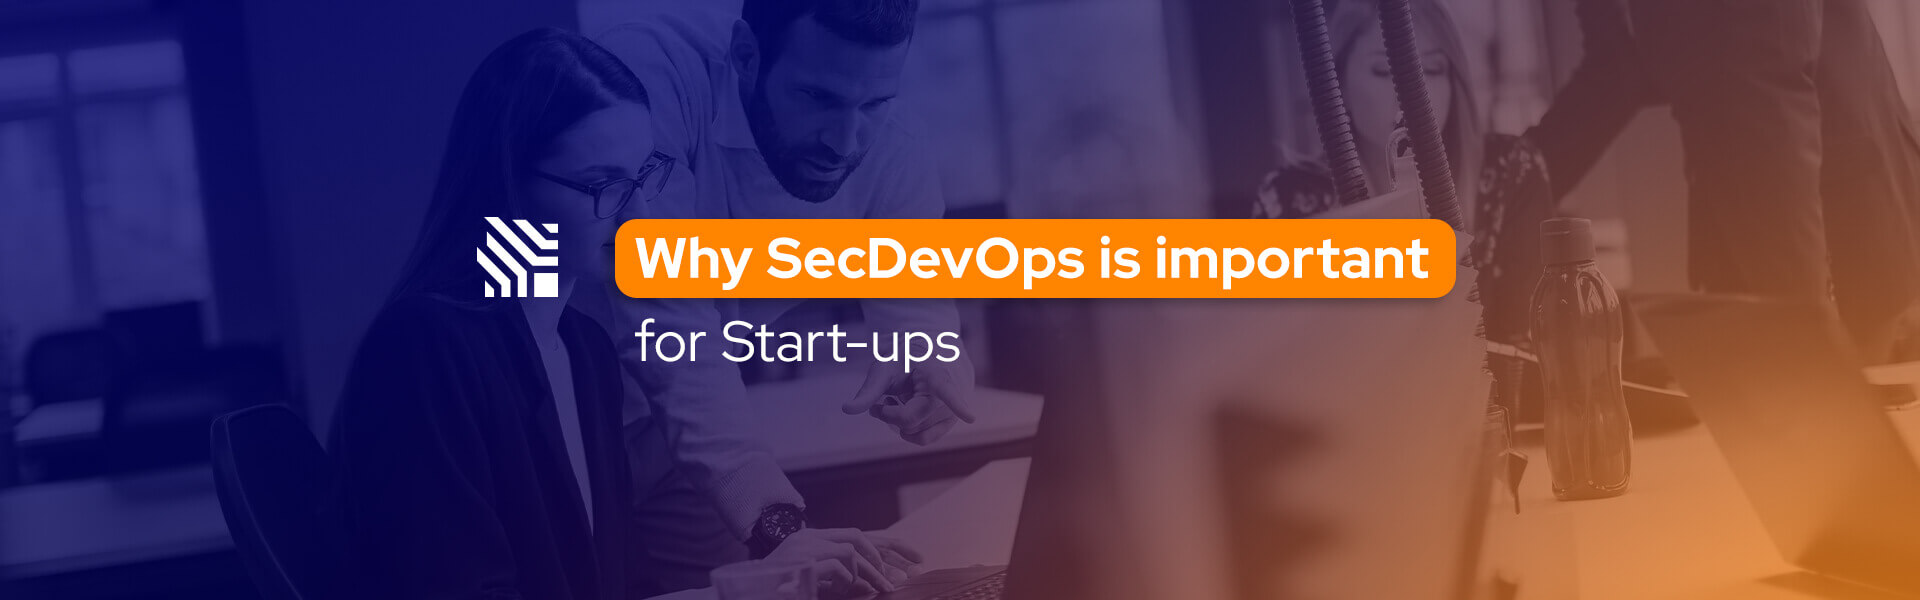 Why SecDevOps is important for Start-ups